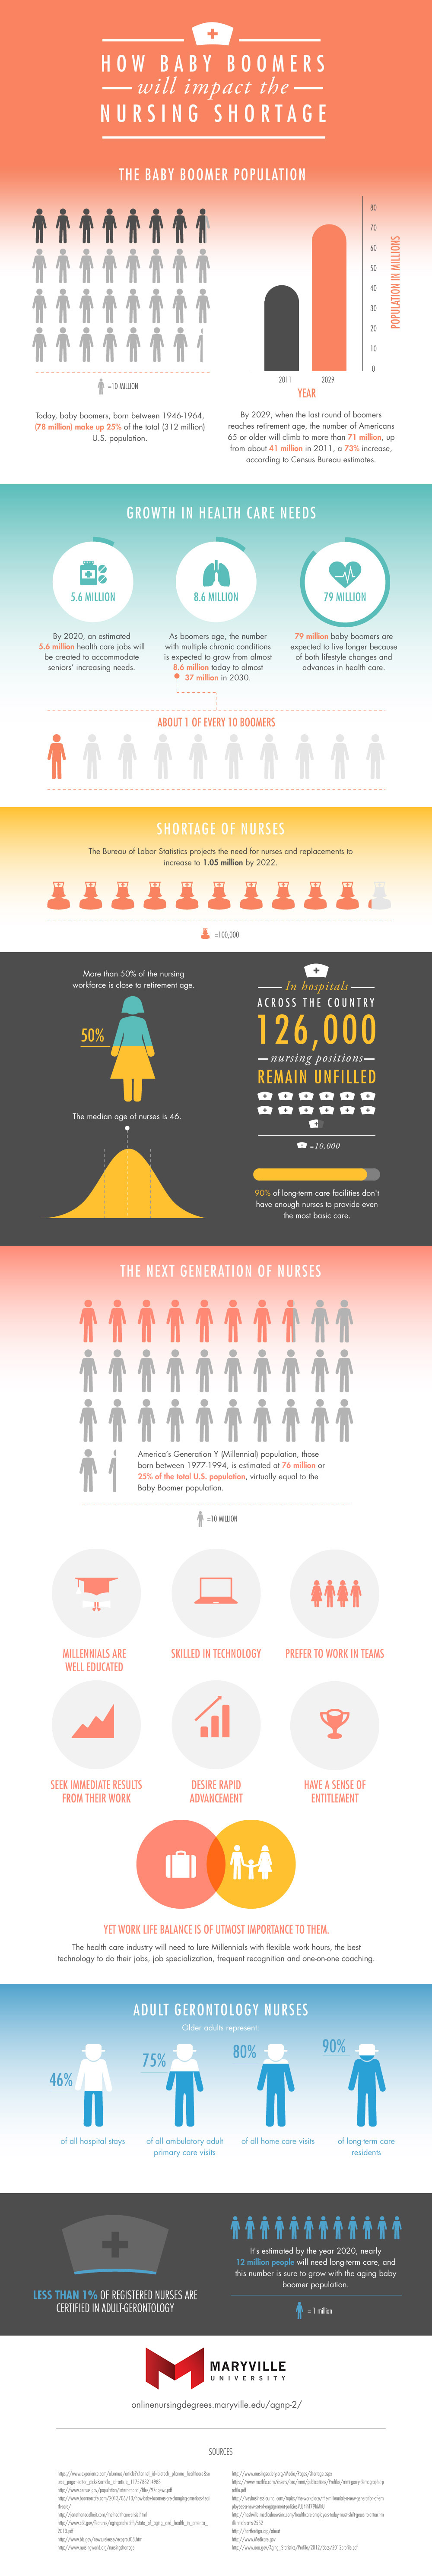 How-Baby-Boomers will impact the nursing shortage infographic